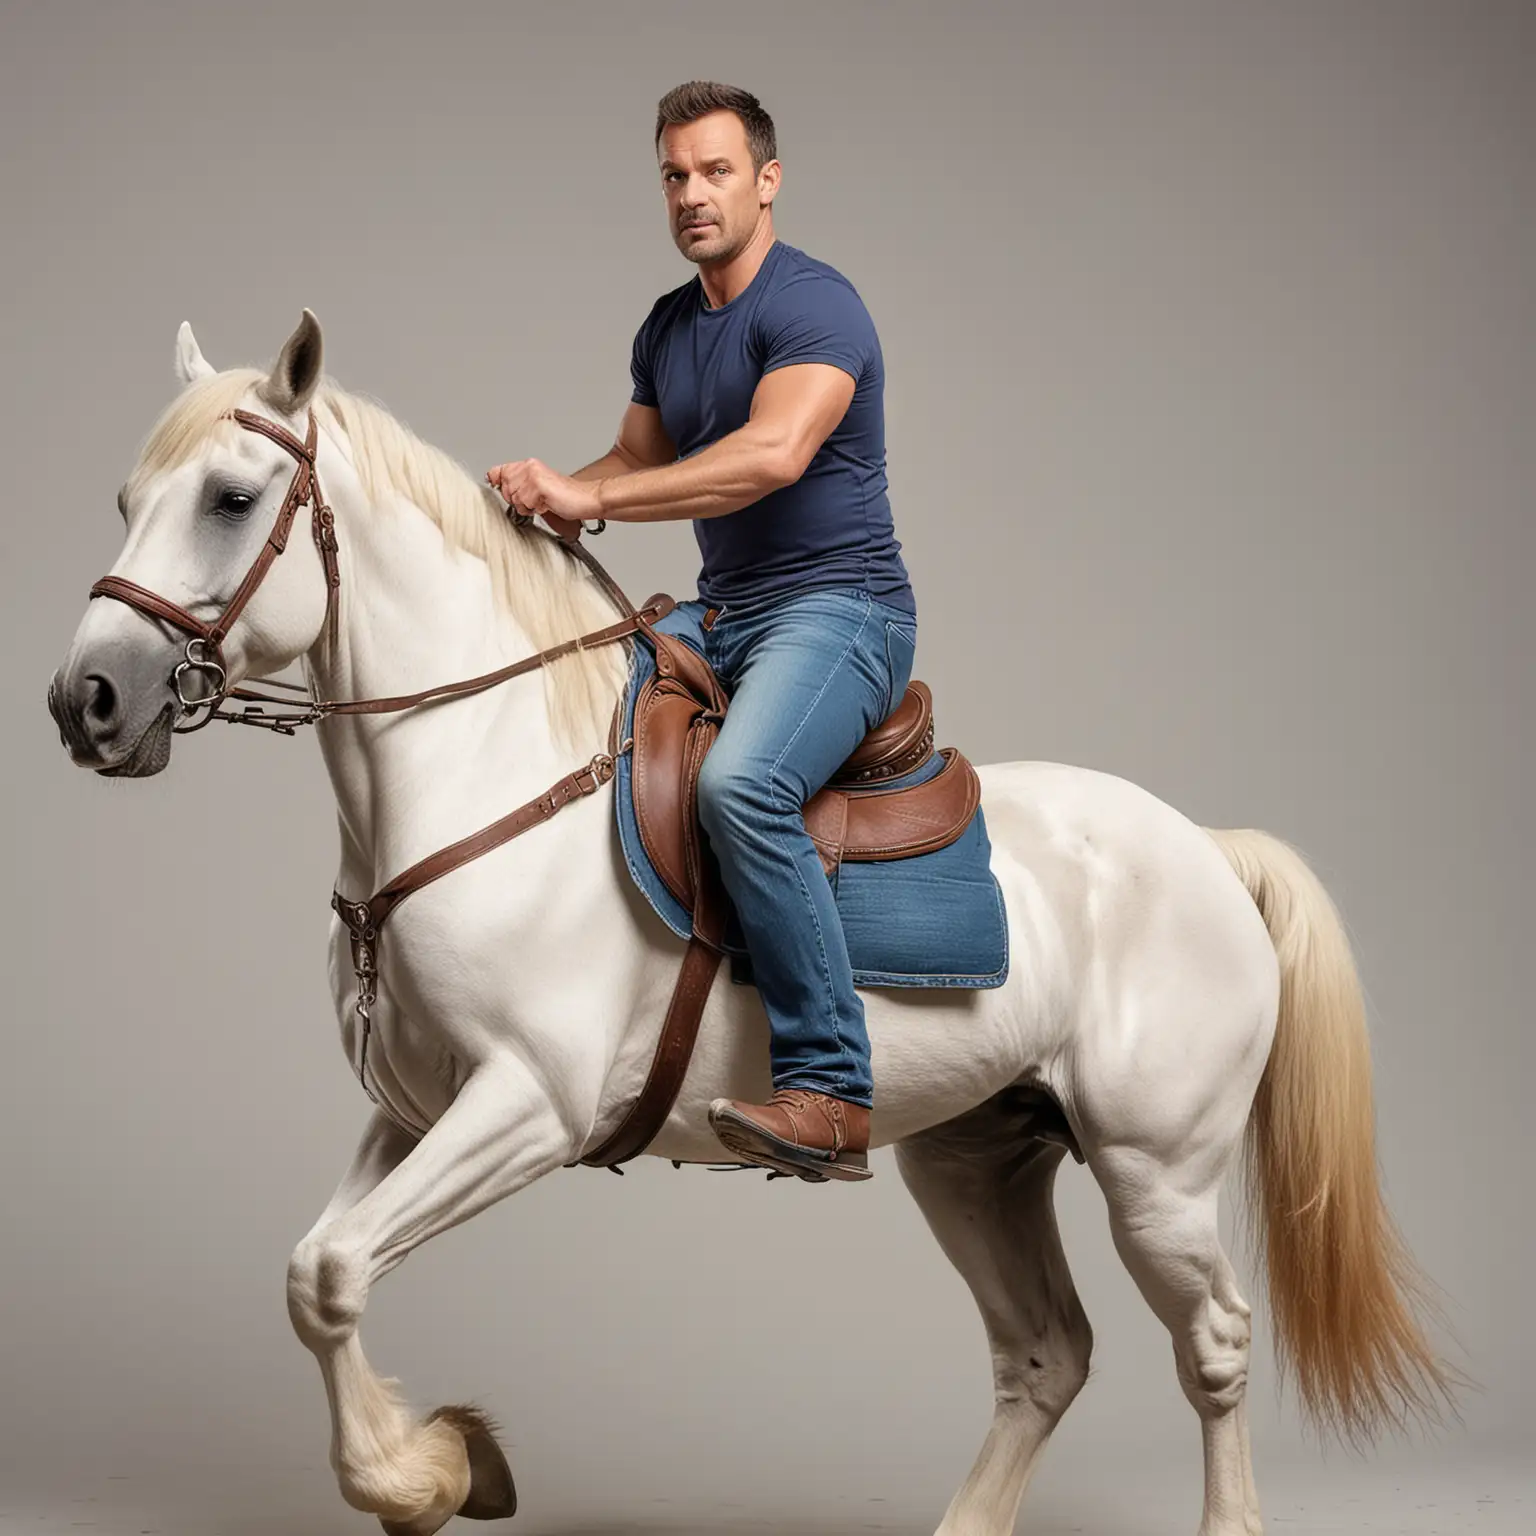 MiddleAged-Man-Riding-Majestic-Horse-in-Casual-Attire